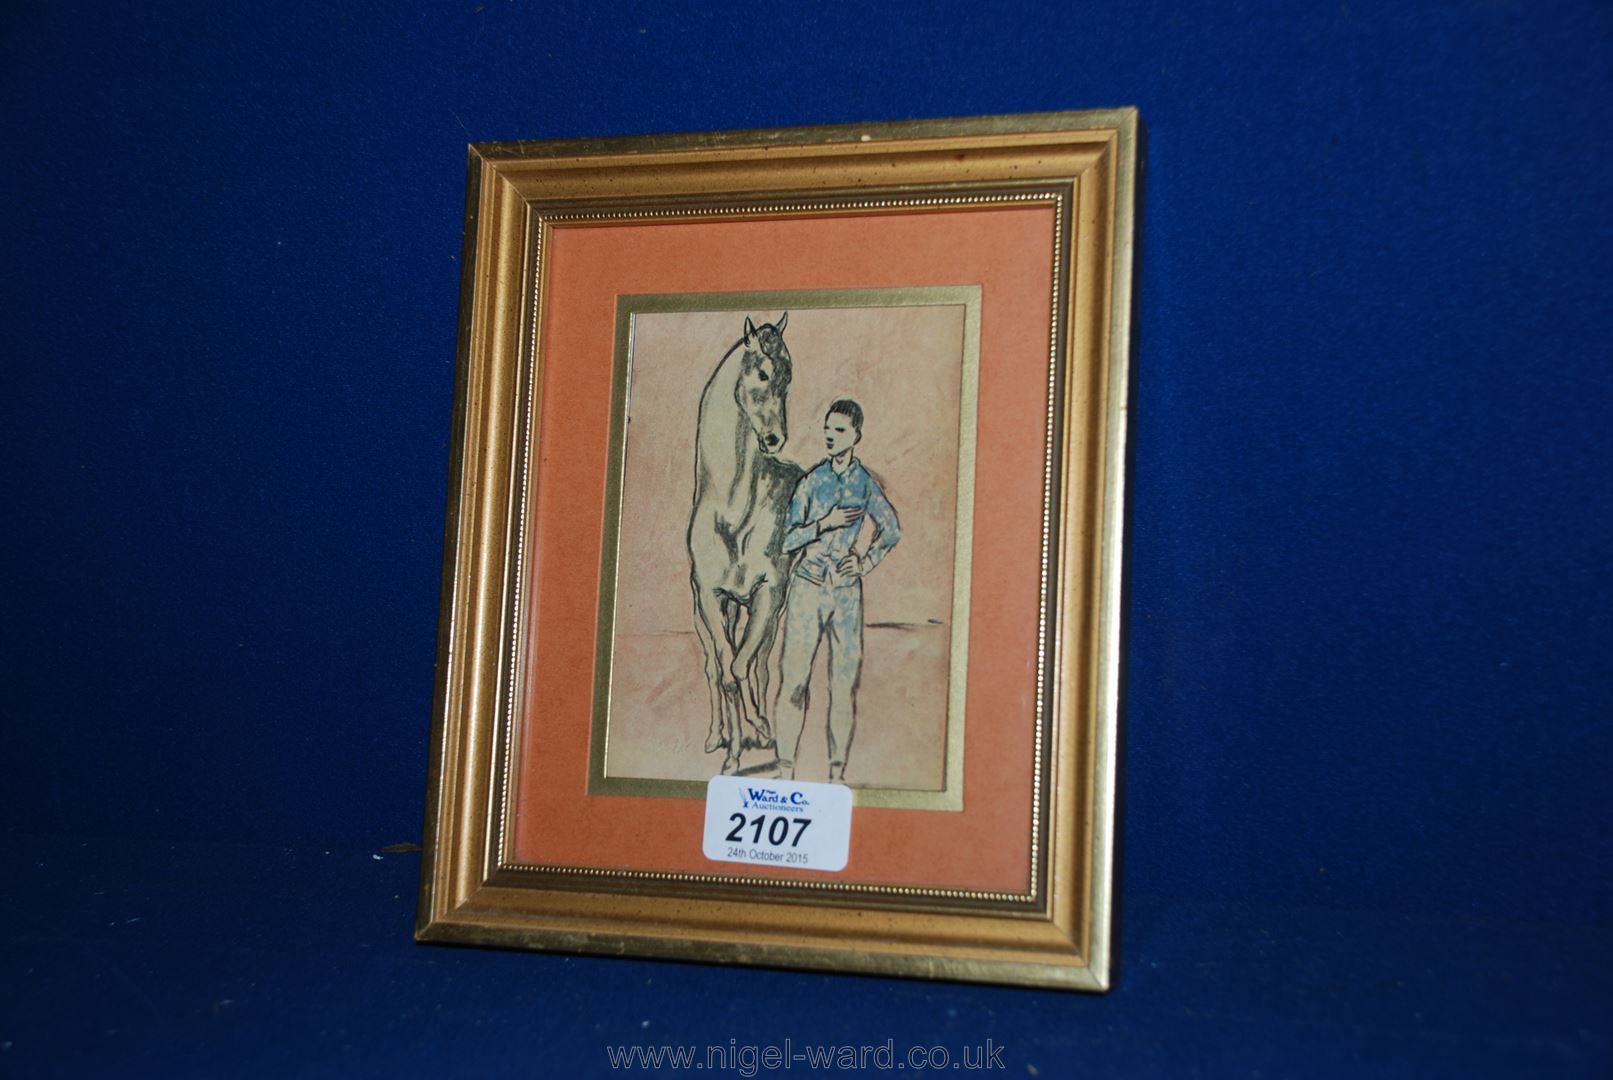 A Pastel drawing after Picasso of man and horse.